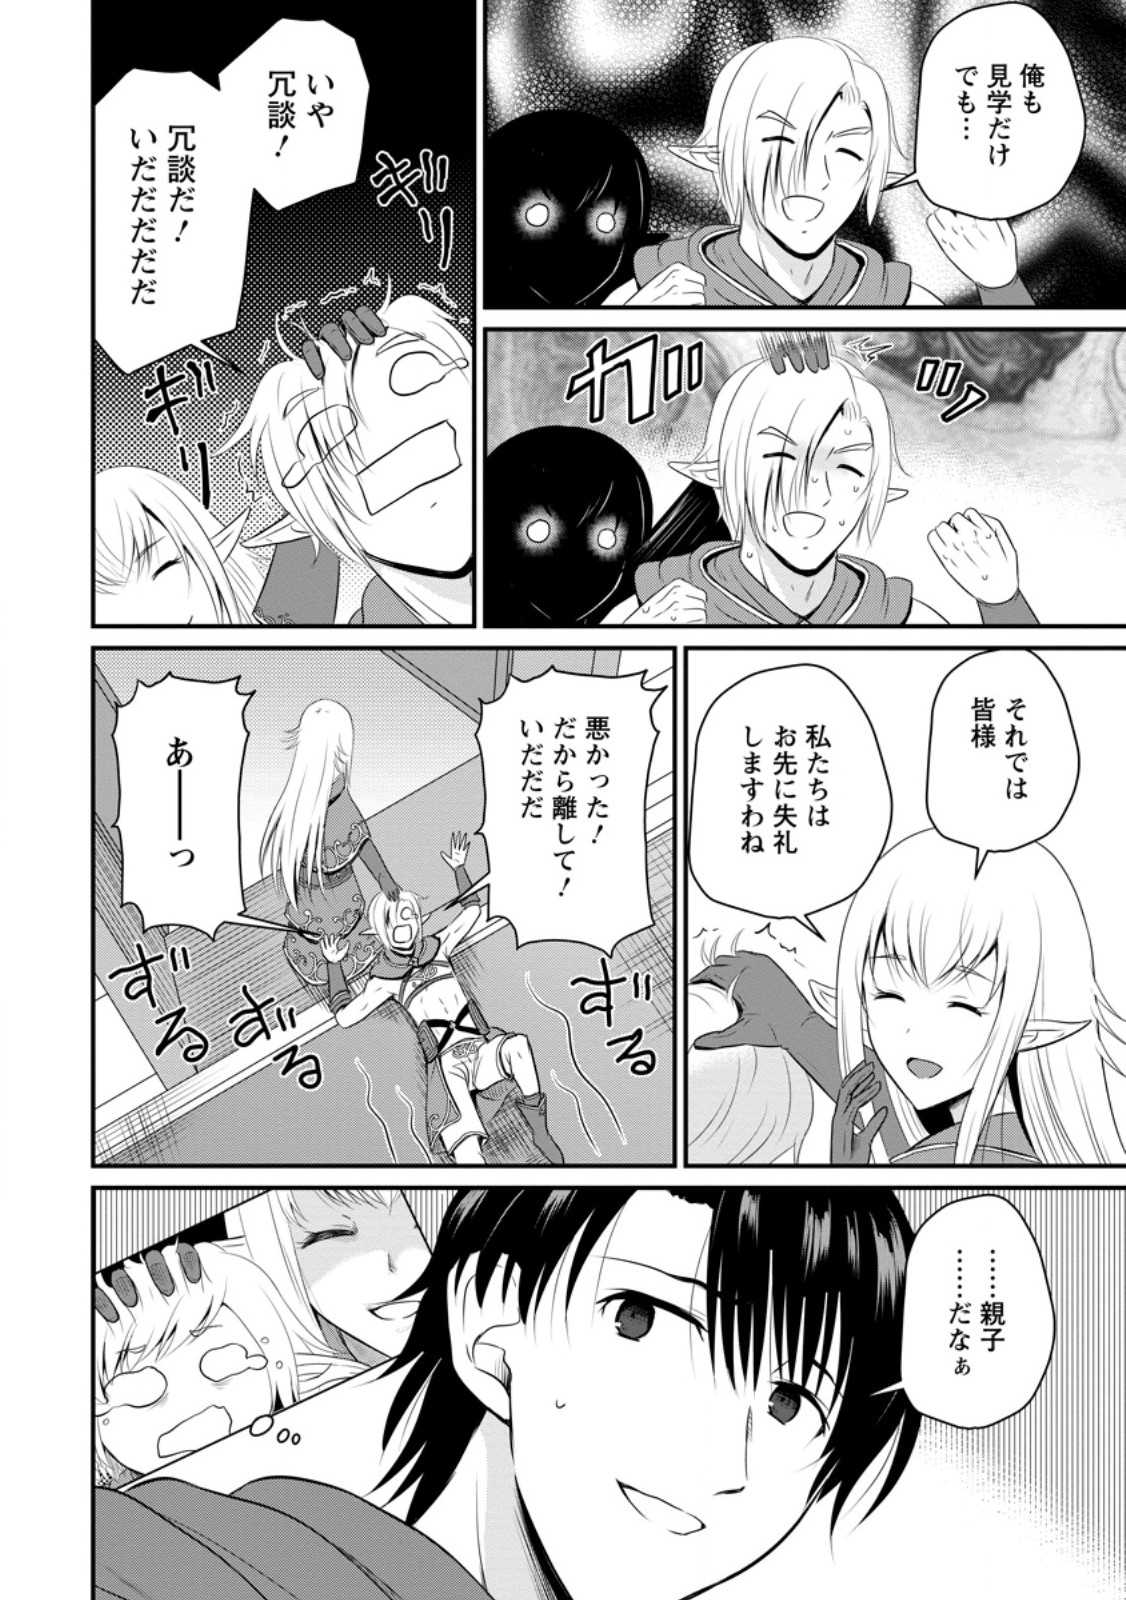 The Frontier Life of The Low-Class Ossan Healer And The Lovery Girl - Chapter 44.3 - Page 2